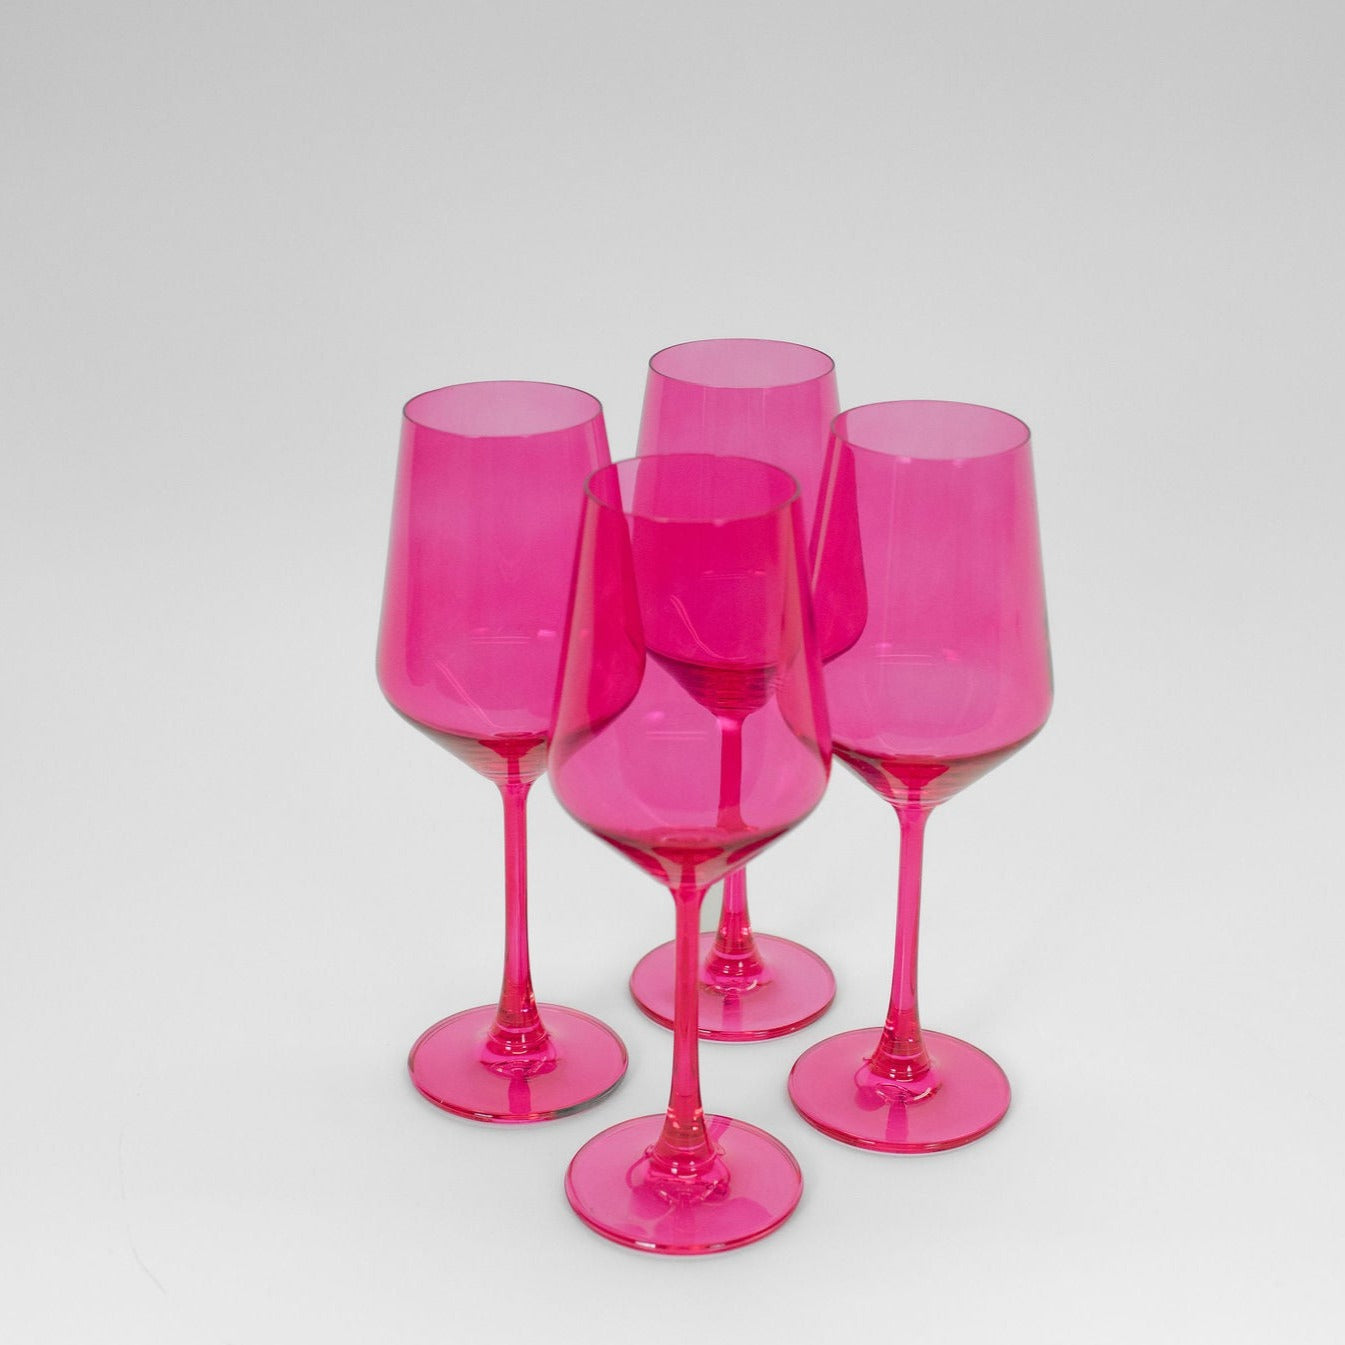 Colored Wine Glasses Set of 4 - Hot Hot Pink